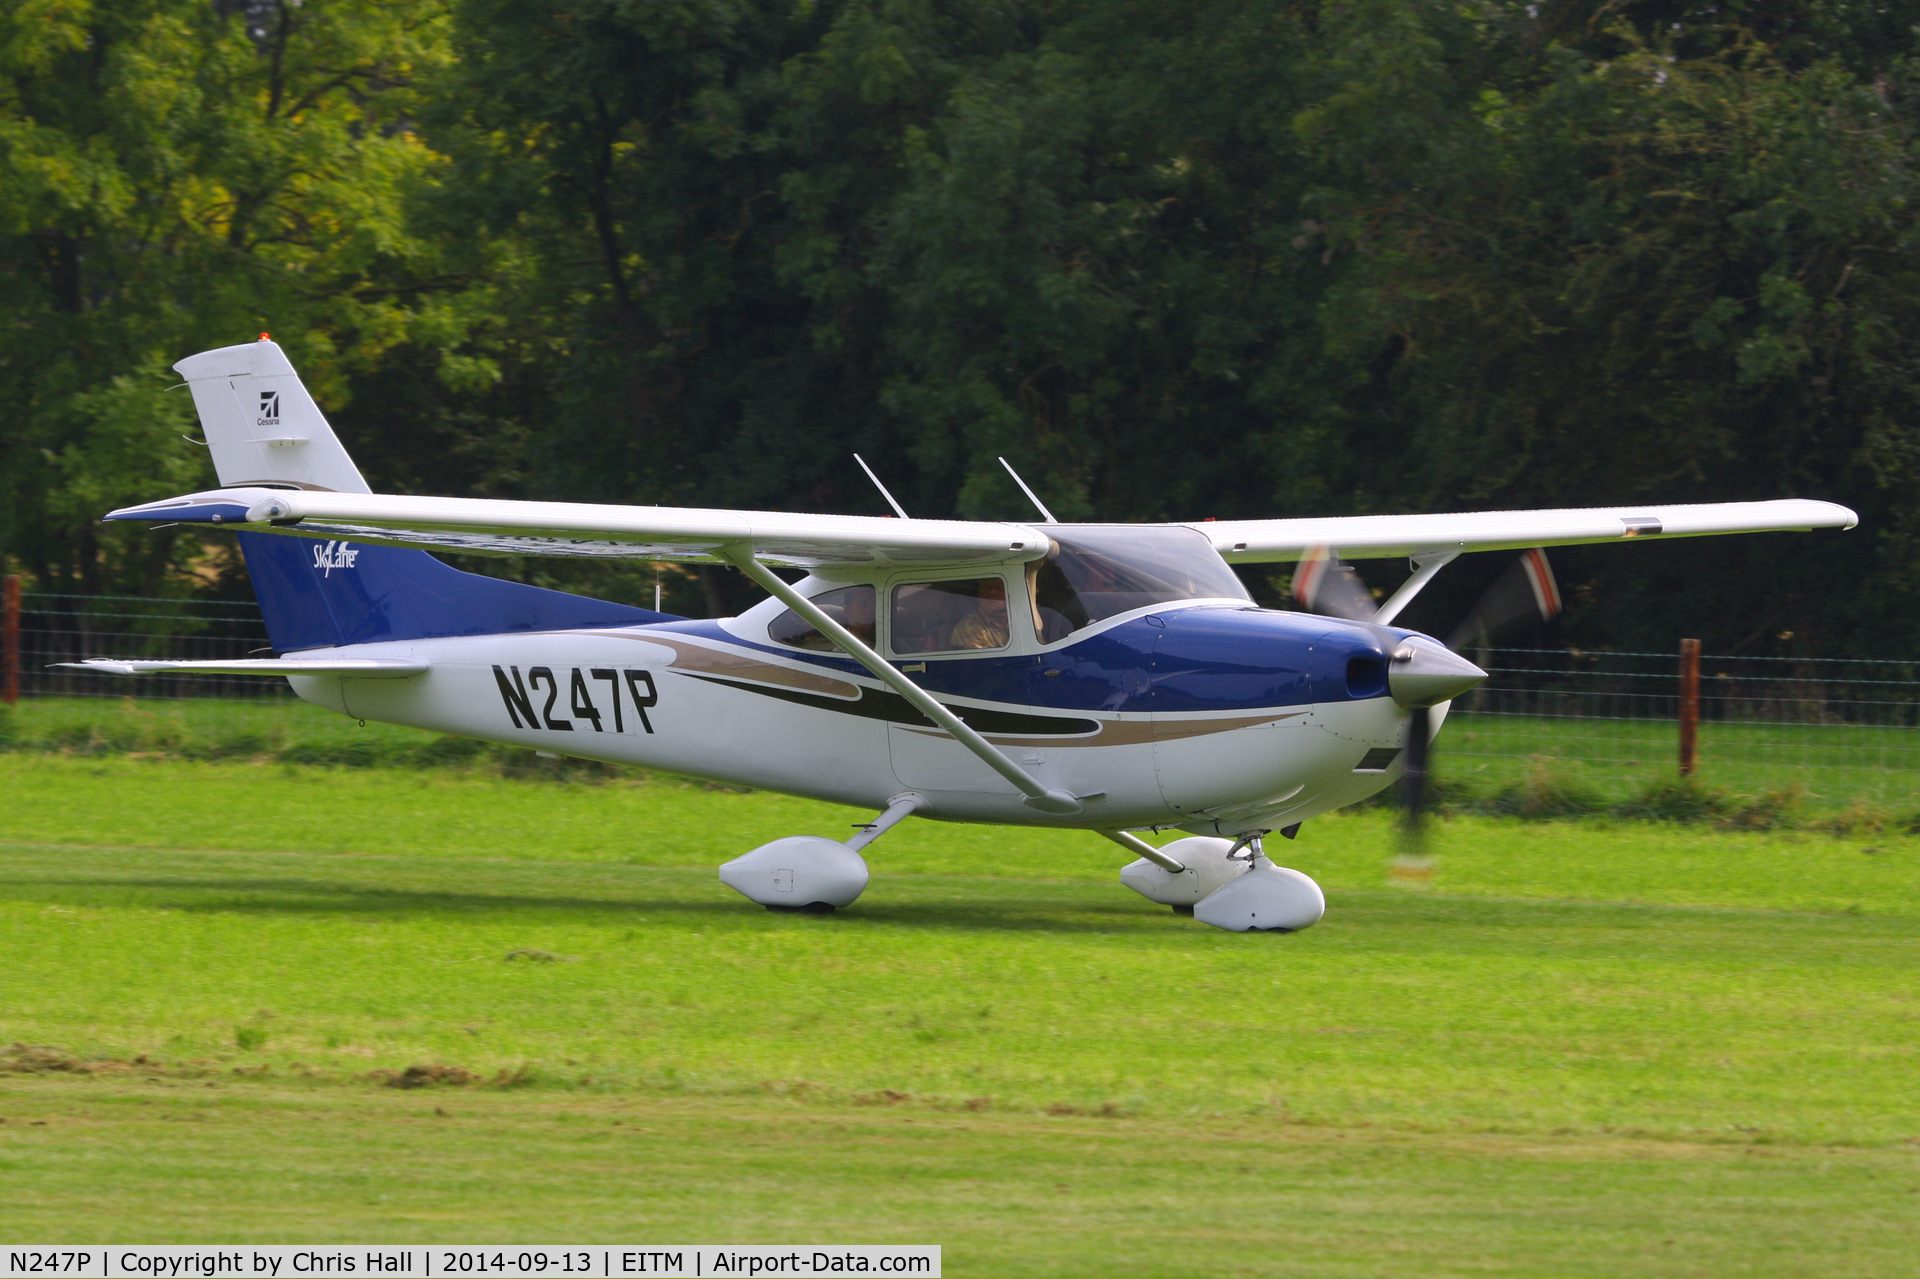 N247P, 2004 Cessna T182T Turbo Skylane C/N T18208280, at the Trim airfield fly in, County Meath, Ireland